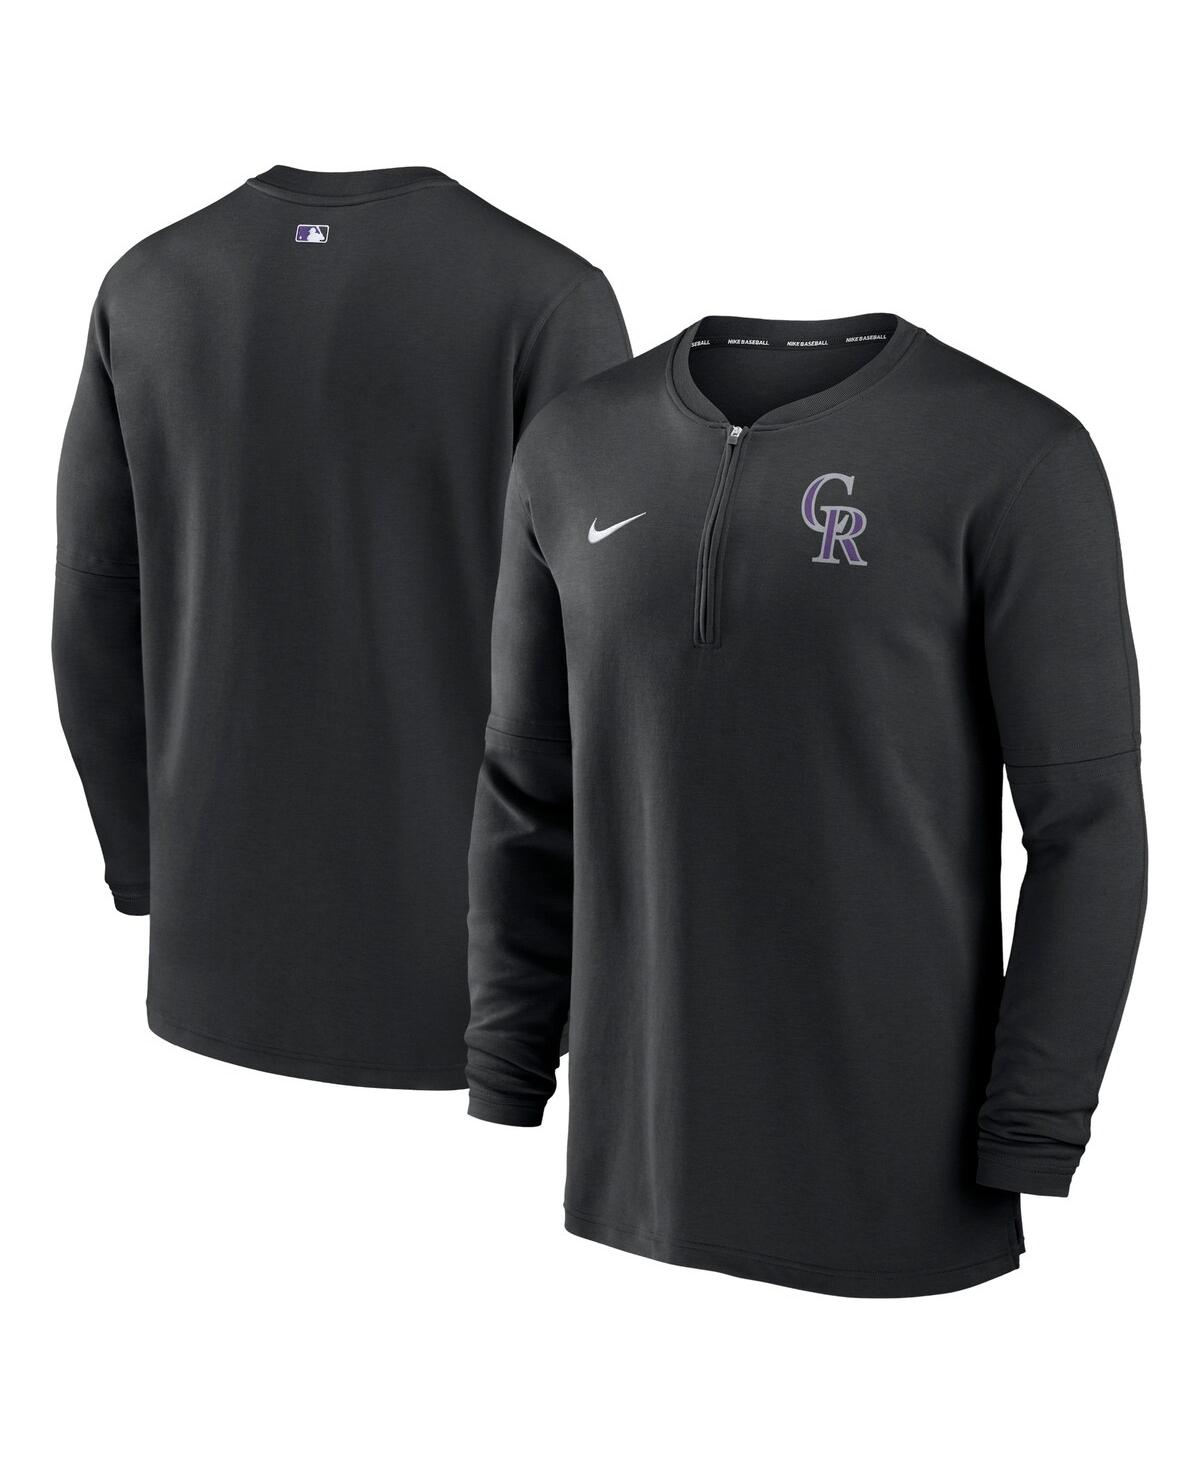 Nike Men's  Black Colorado Rockies Authentic Collection Game Time Performance Quarter-zip Top